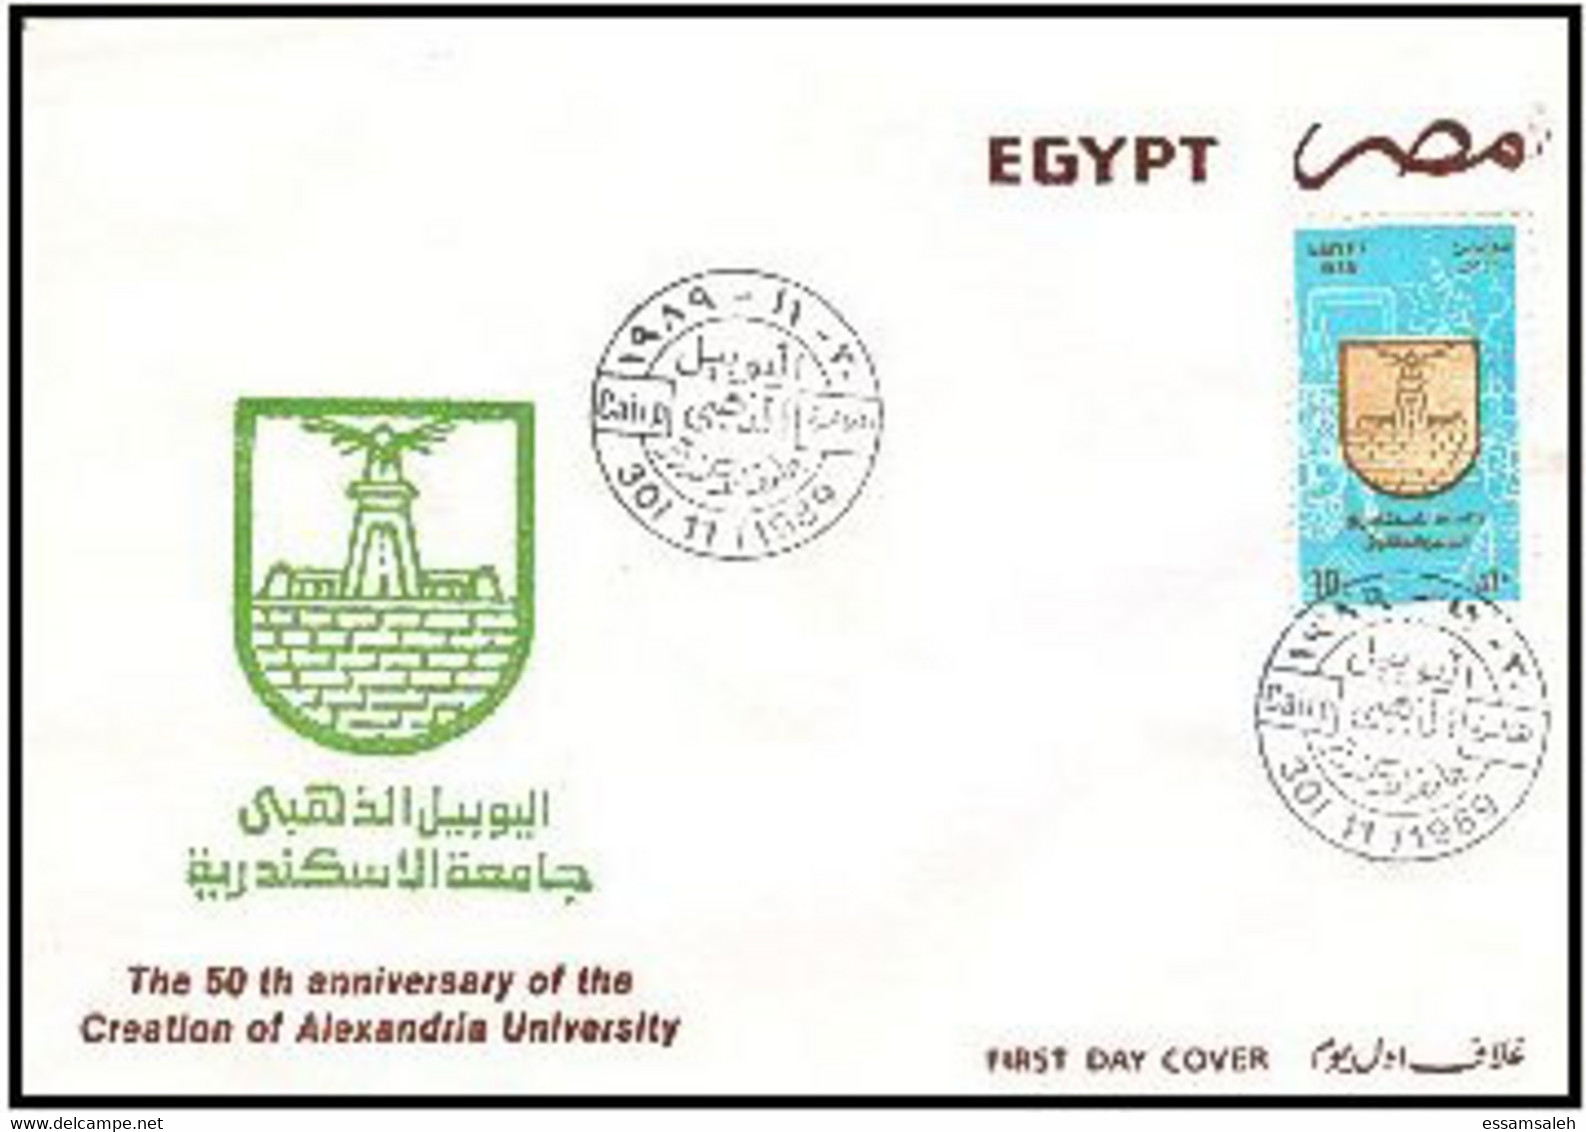 EGS30521 Egypt 1989 Illustrated FDC Golden Jubilee, Alexandria University - Covers & Documents